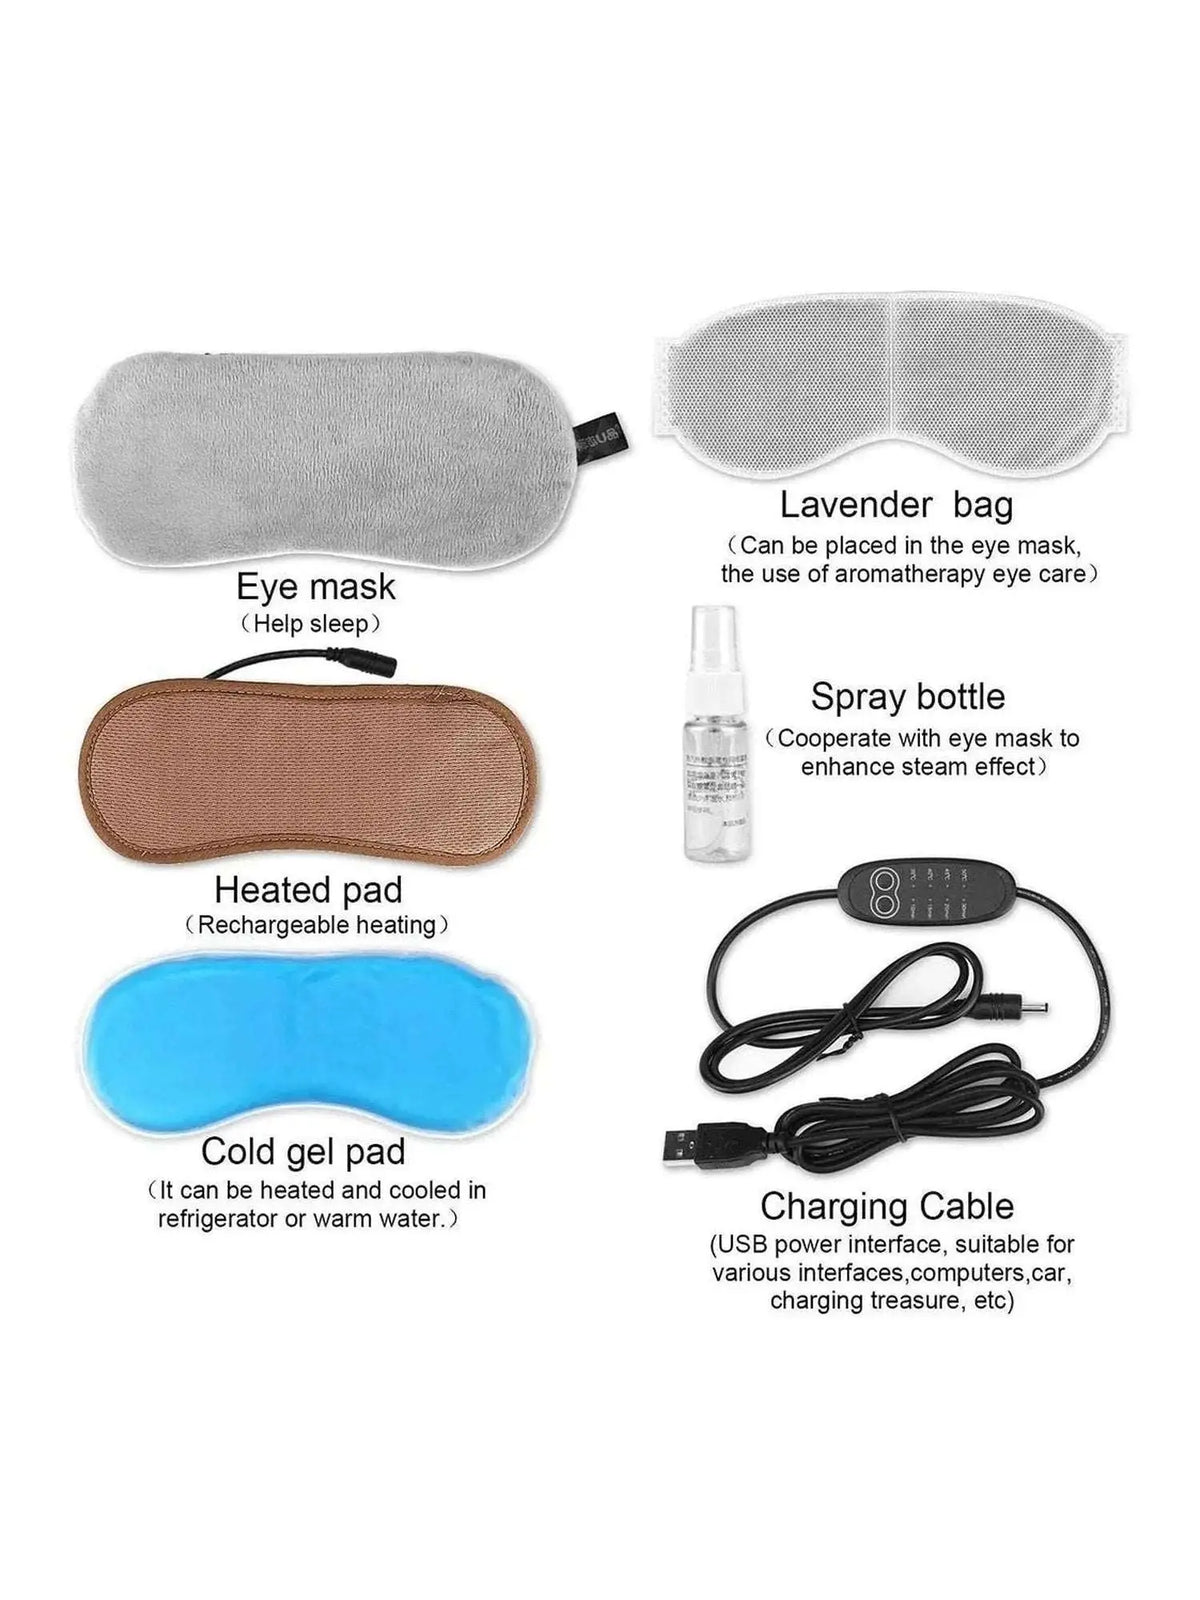 Eye mask Package Includes mask, heating pad, cool gel pad, lavender bag, spray bottle, charging cable